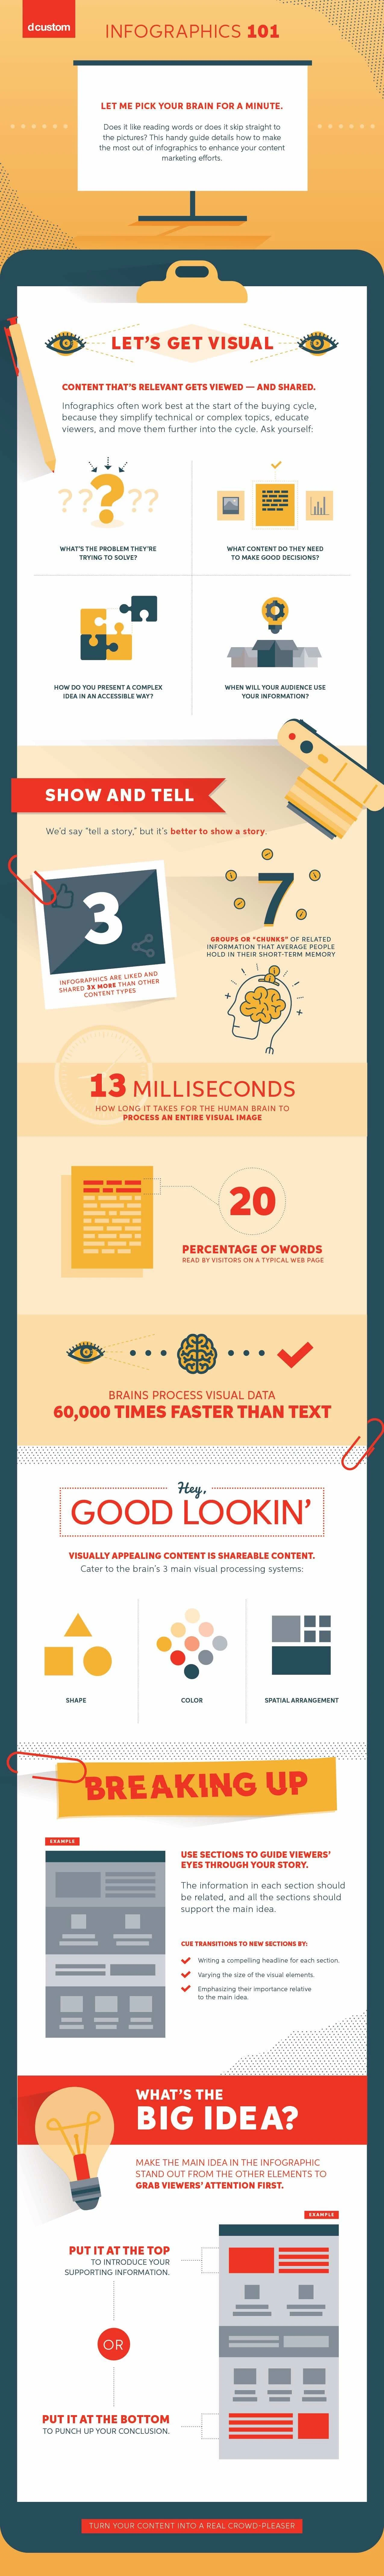 How To Master The #Infographic